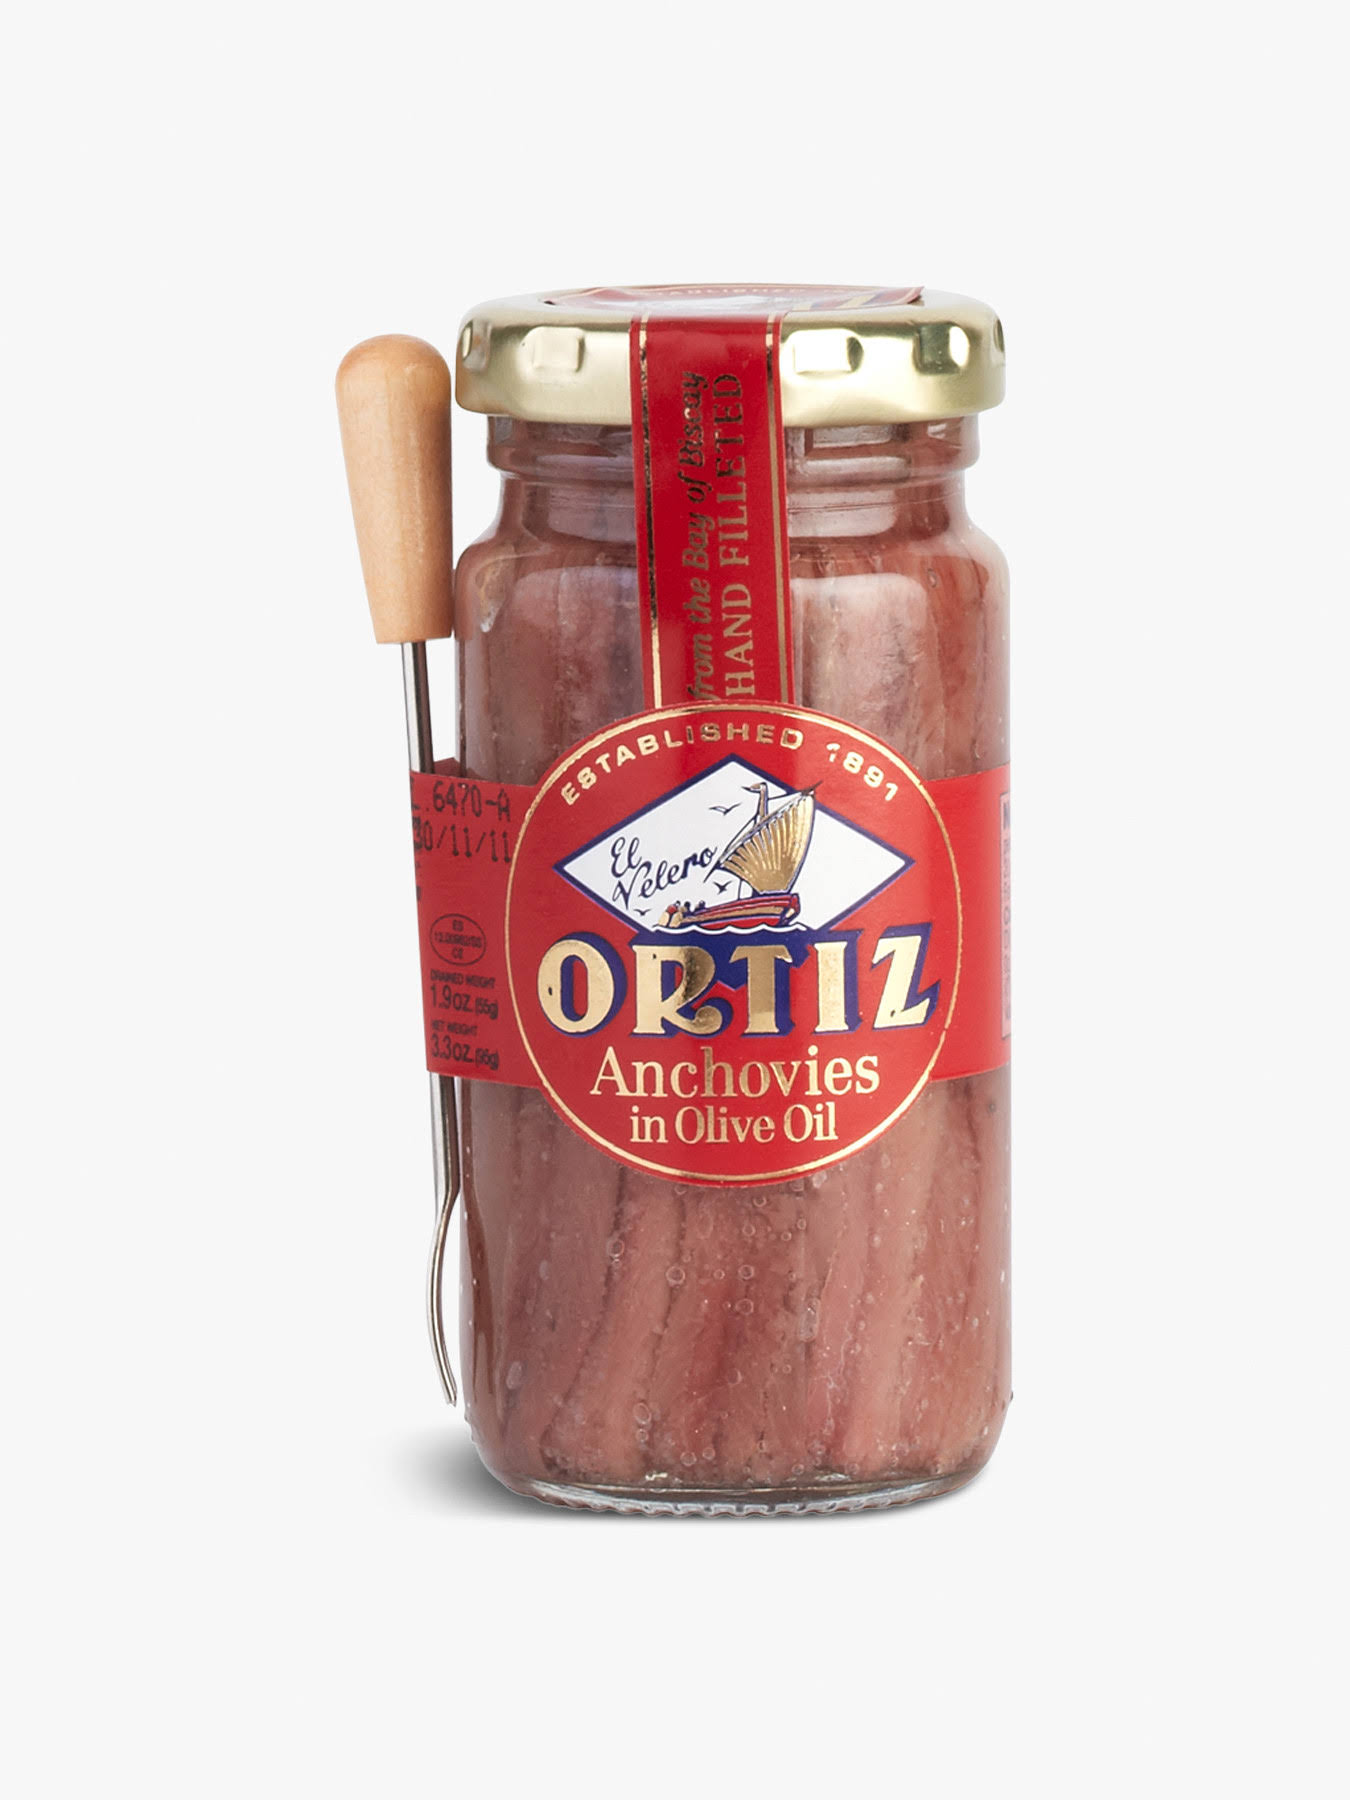 Ortiz Anchovy Fillets in Oil - 95g